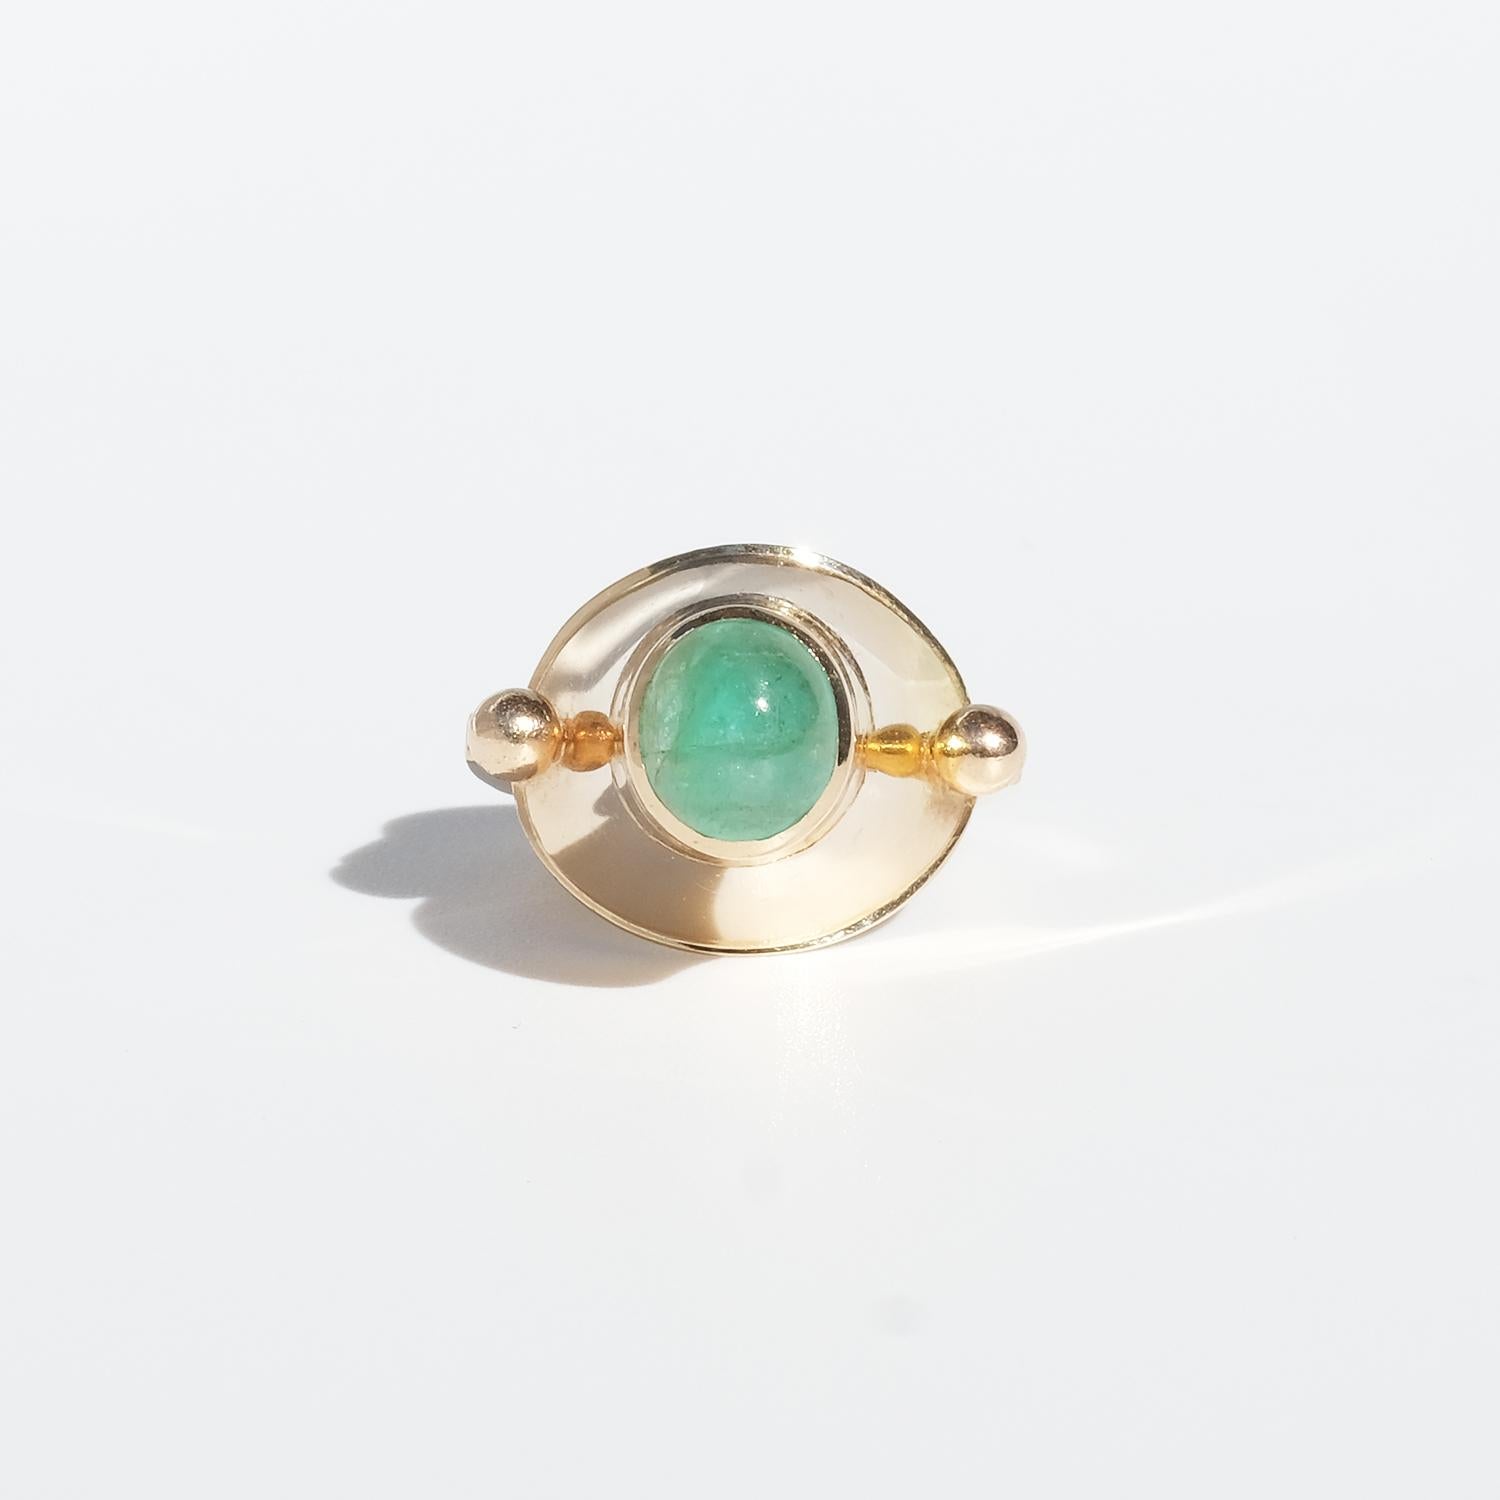 Swedish 18 K Gold Ring with an Emerald Made in 1966, Sigurd Persson 5